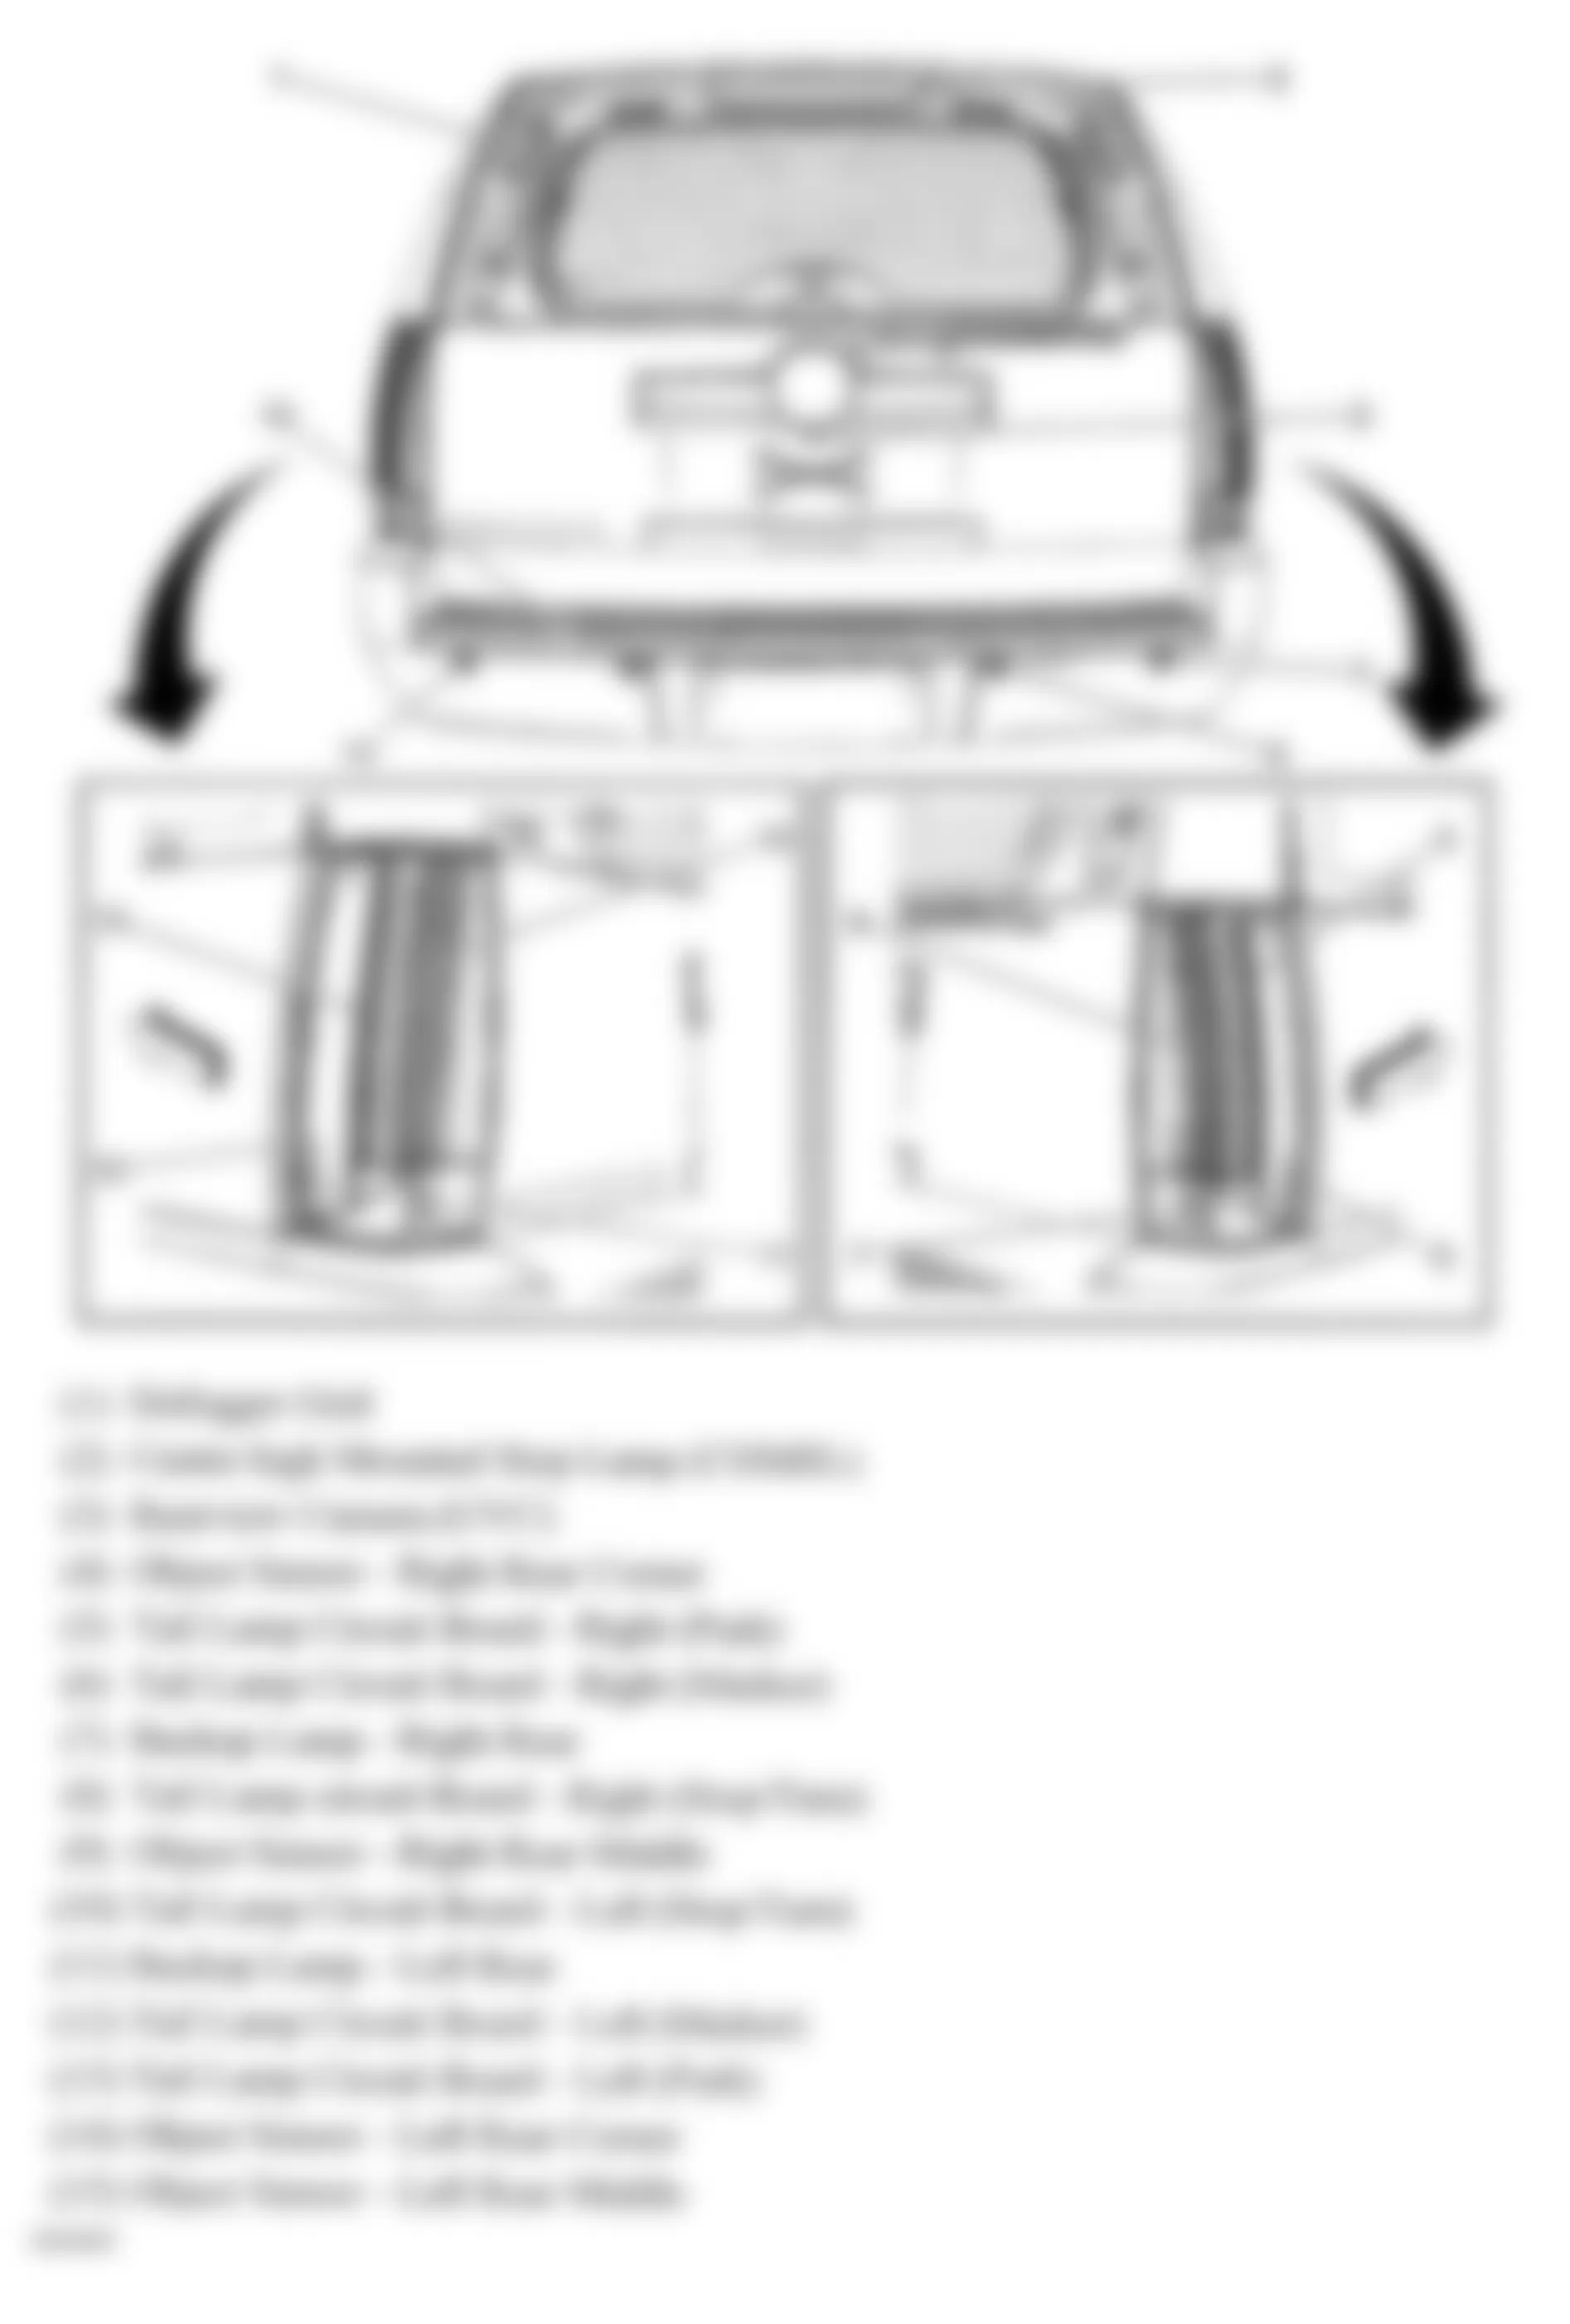 GMC Yukon 2008 - Component Locations -  Rear Of Vehicle (Tahoe & Escalade W/One Piece Liftgate)